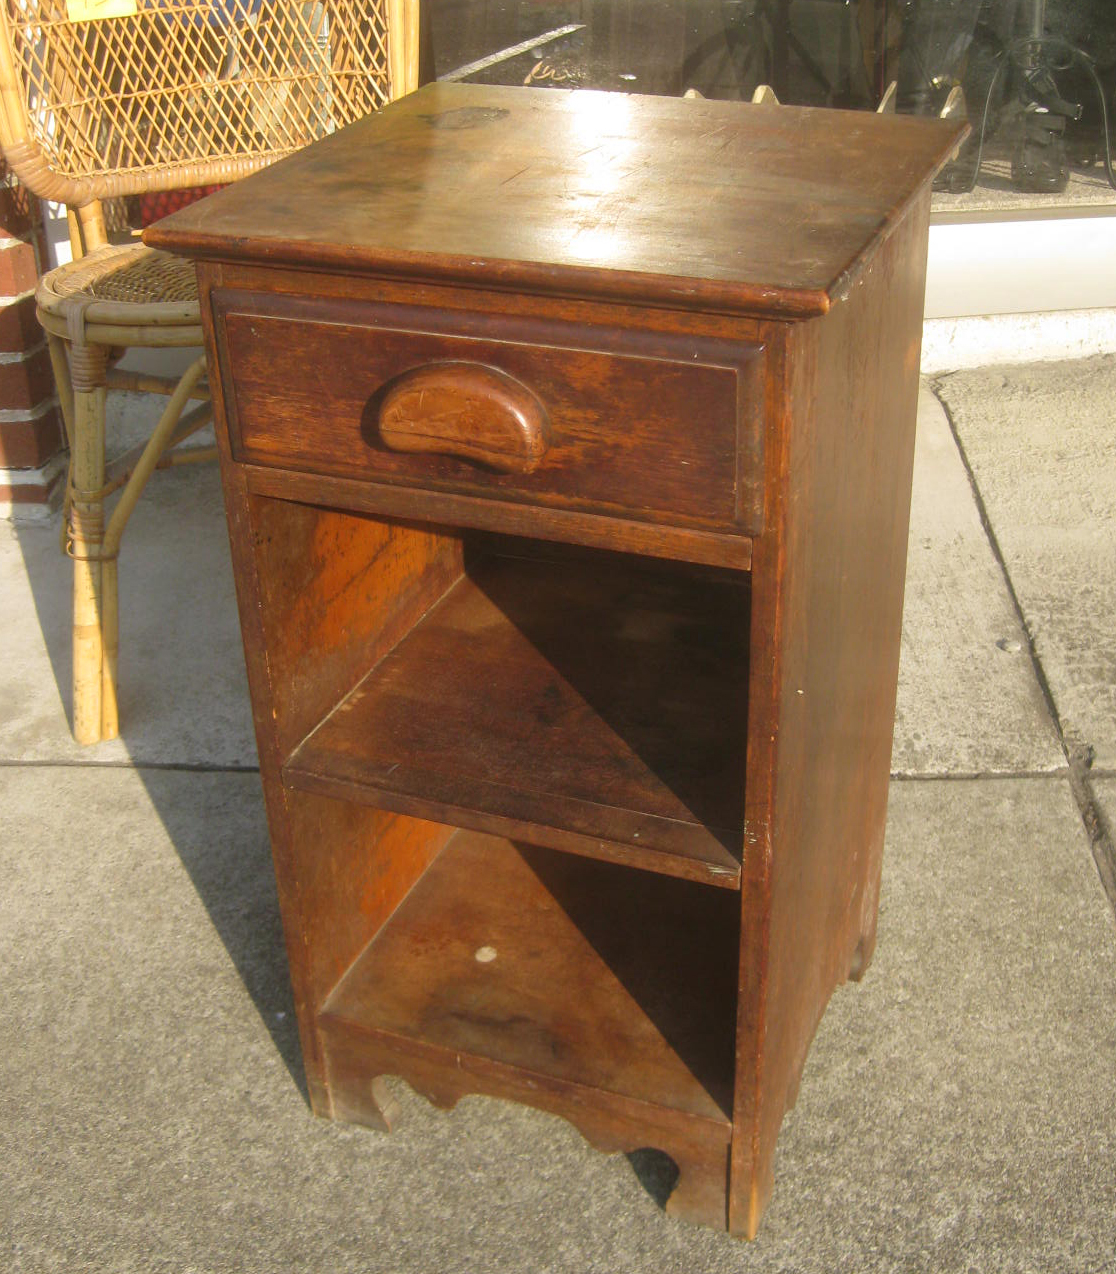 UHURU FURNITURE & COLLECTIBLES: SOLD - Wooden Night Stand - $351116 x 1274